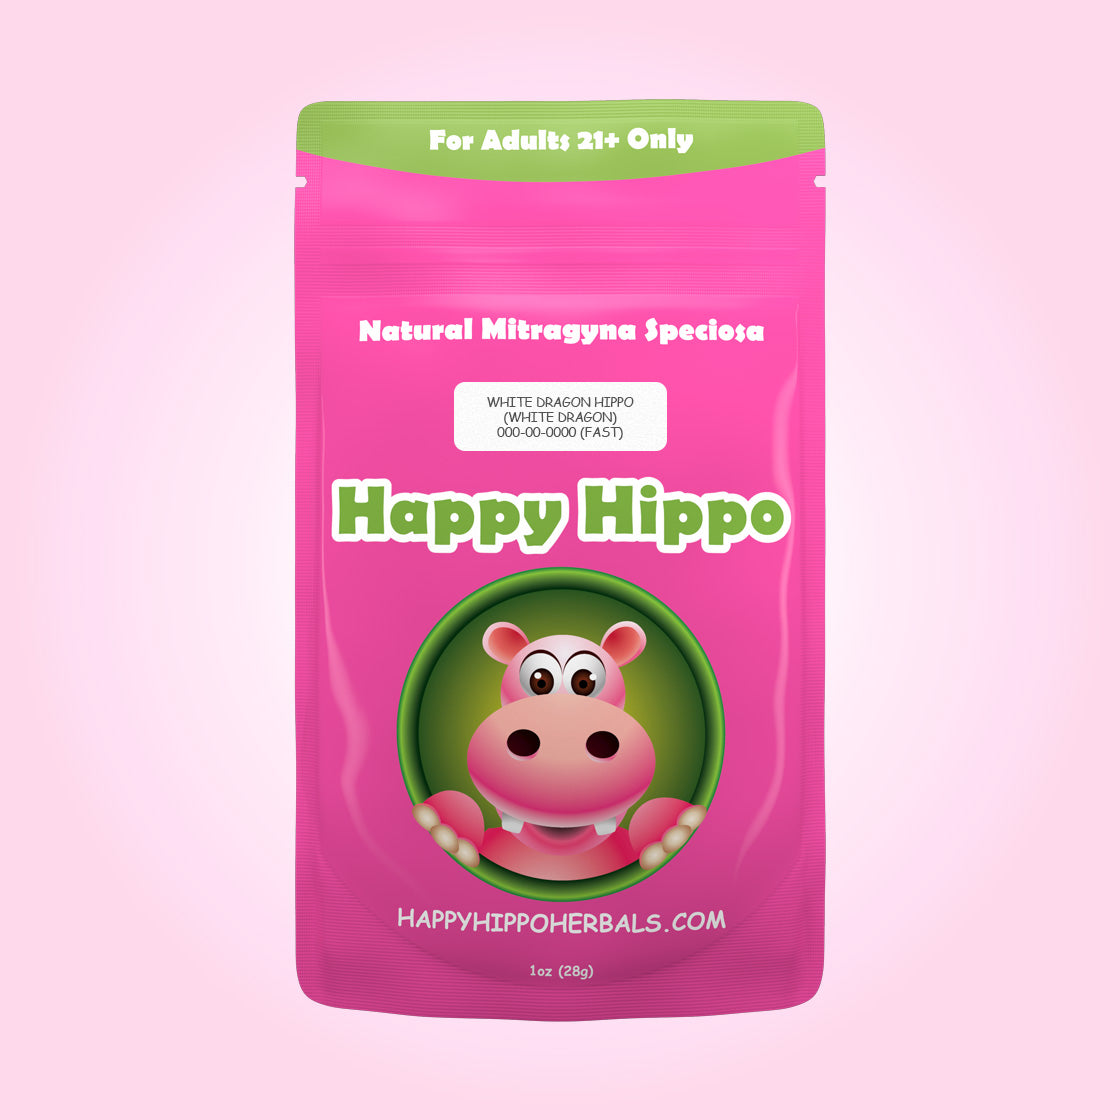 Product Image depicting a 1oz bag of Happy Hippo Blended White Vein Maeng Da and White JongKong Kratom Powder (Mitragyna Speciosa). We call this blend White Dragon